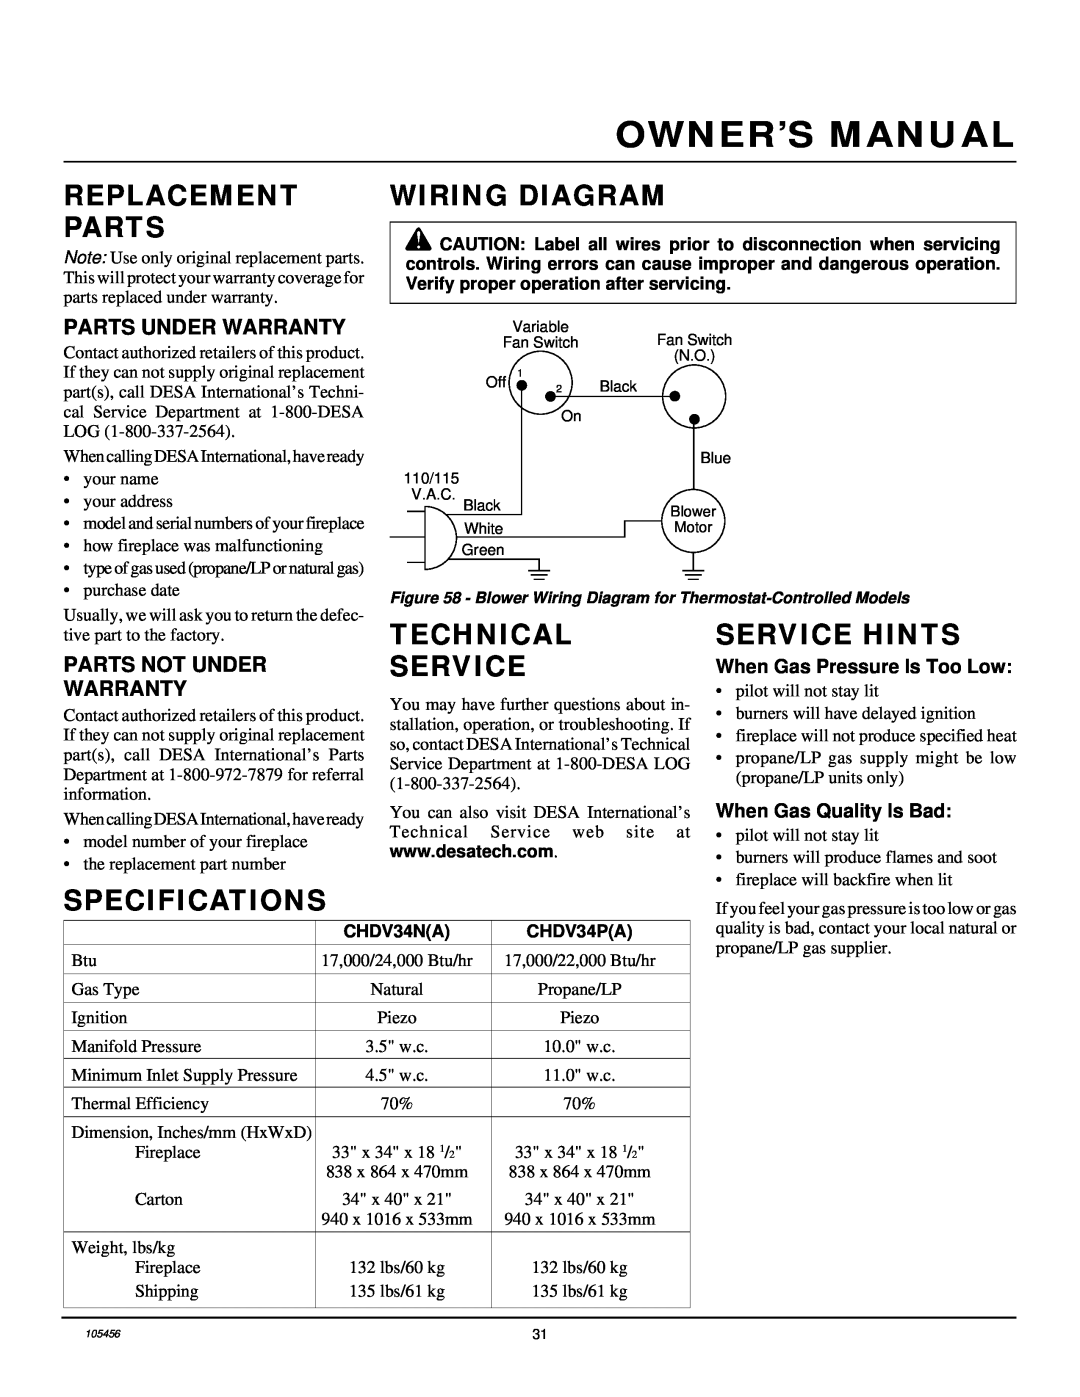 Desa CHDV34(N/P)(A) Replacement Parts, Wiring Diagram, Technical Service, Service Hints, Specifications, Owner’S Manual 